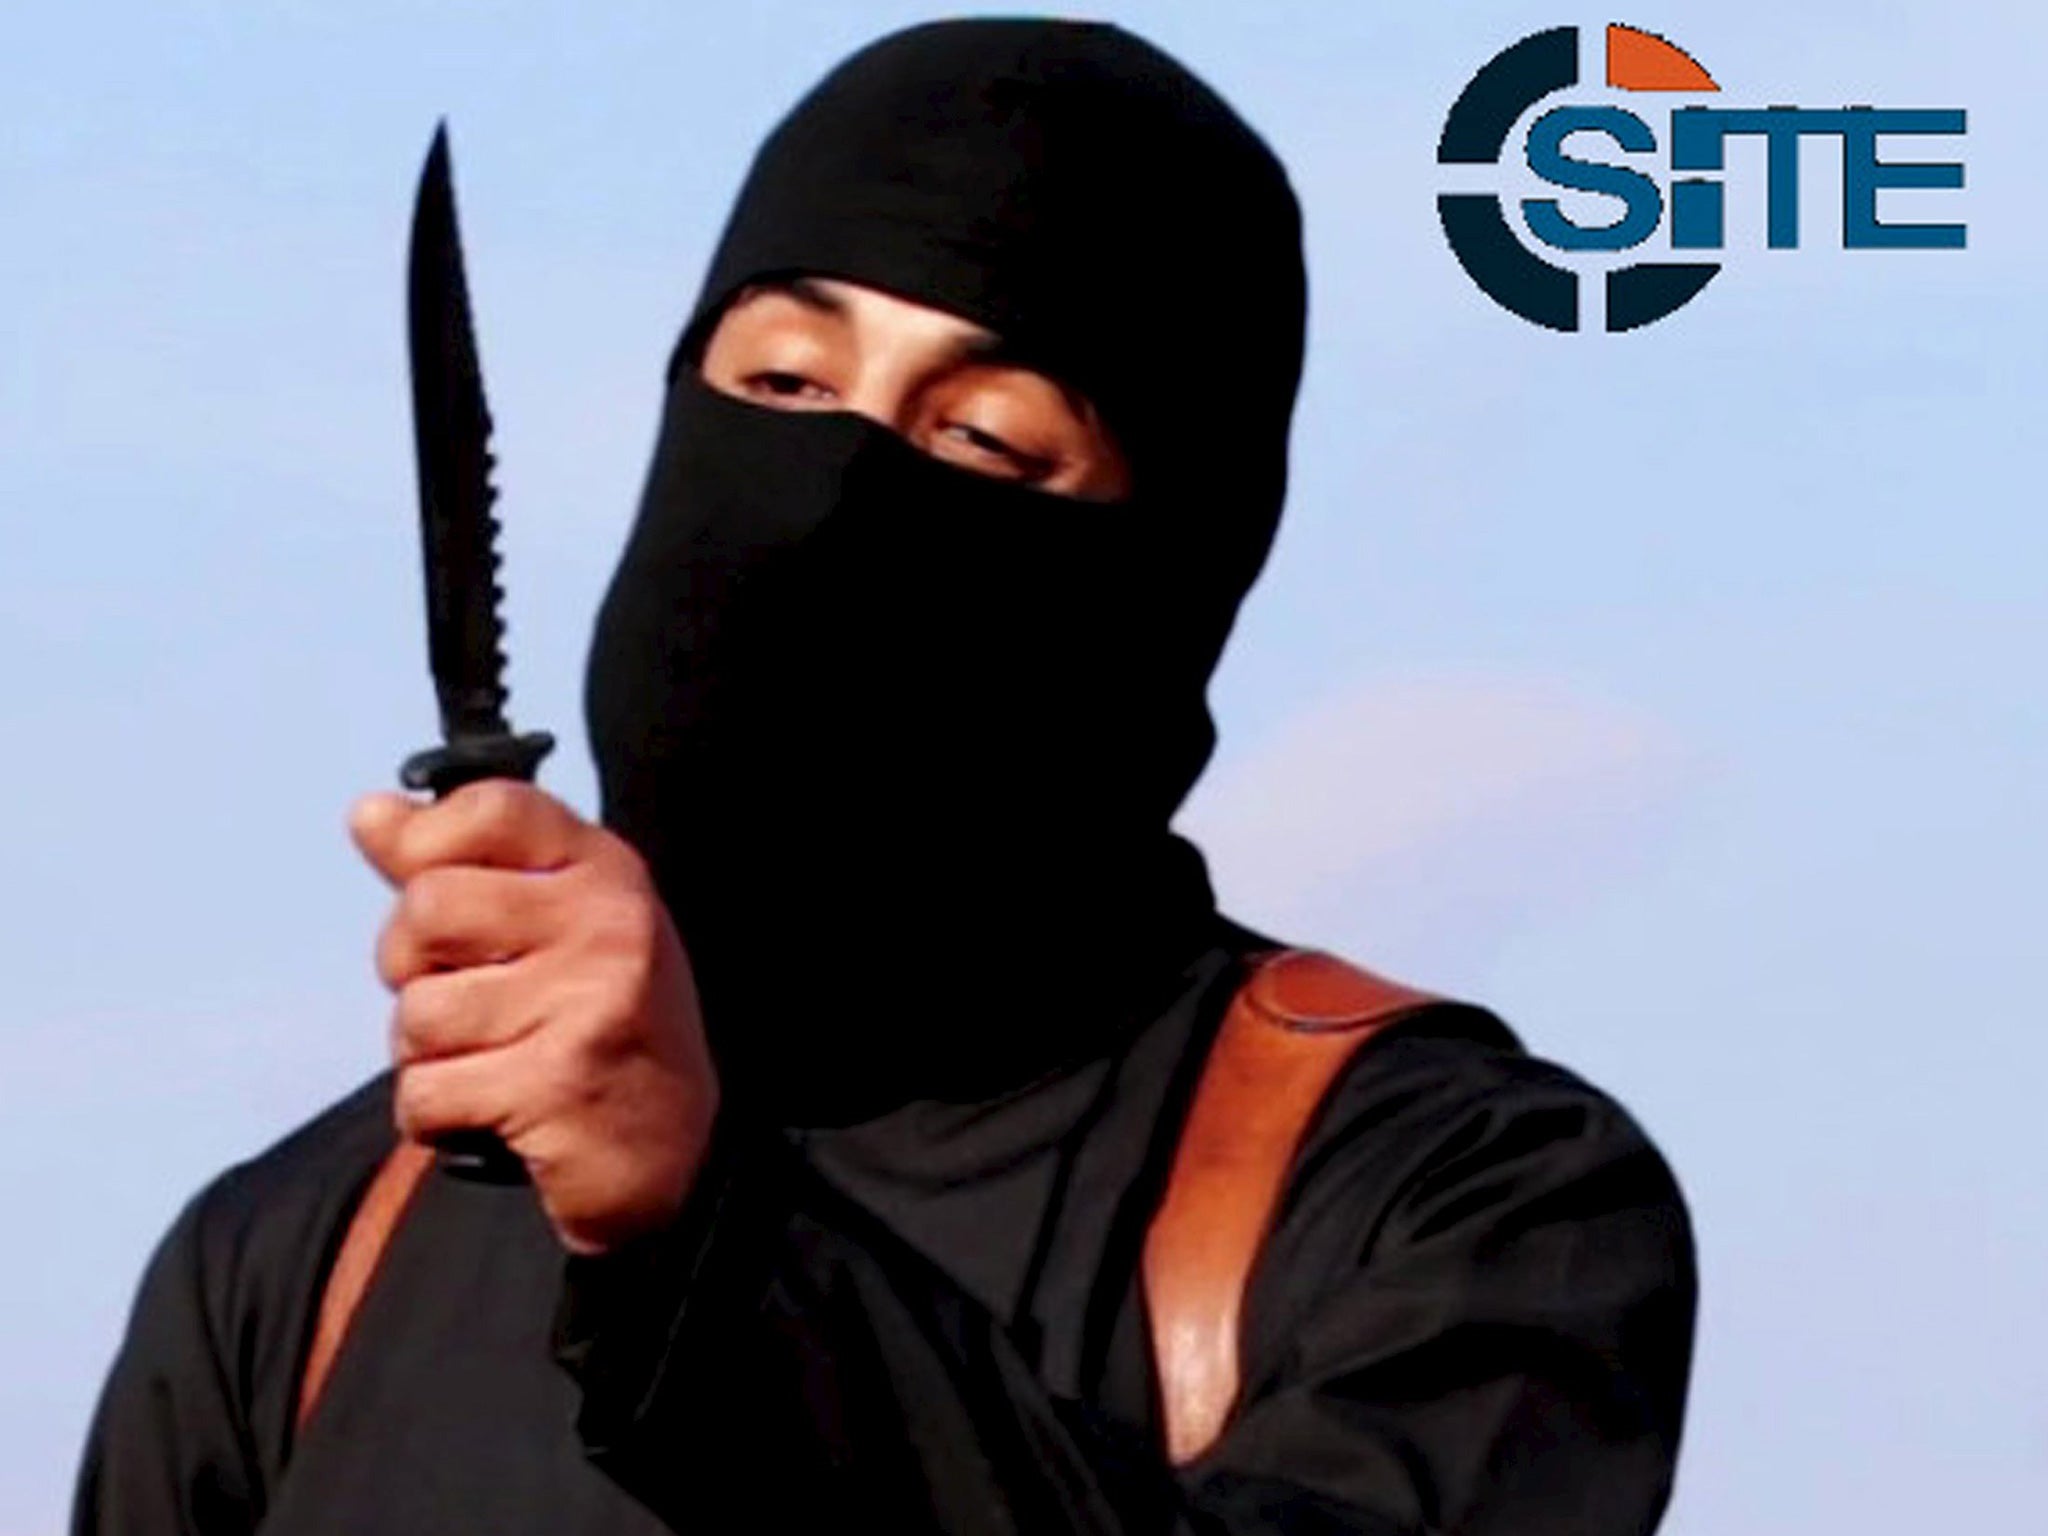 Mohammed Emwazi brandishes a knife in this still file image from a 2014 video